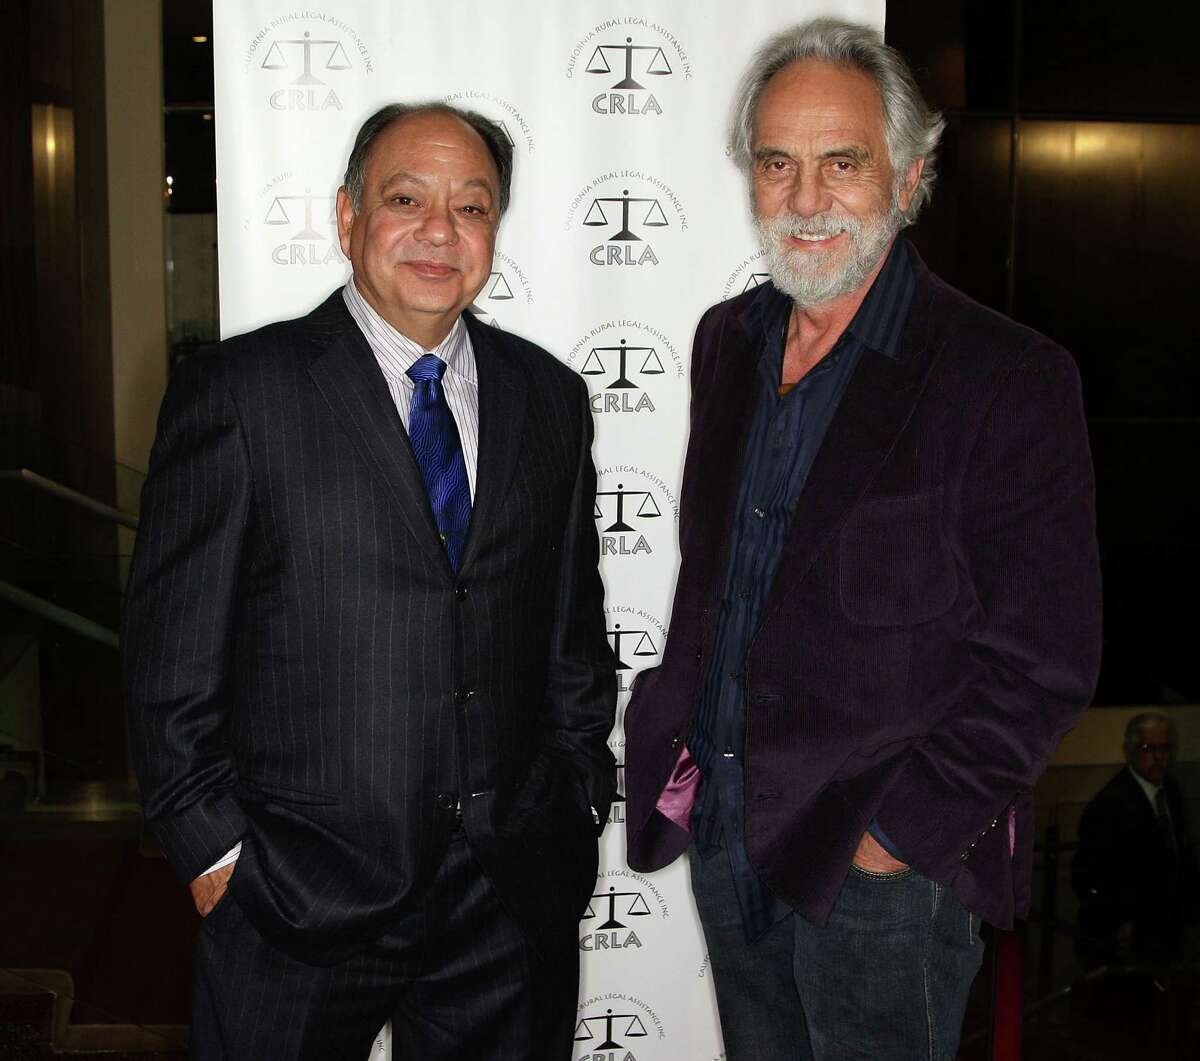 BEVERLY HILLS, CA - FEBRUARY 09: Actors Cheech Marin (L) and Tommy Chong attend the California Rural Legal Assistance Teguino Celebration Gala at the Beverly Hilton Hotel on February 9, 2009 in Beverly HIlls, California. (Photo by Frederick M. Brown/Getty Images)